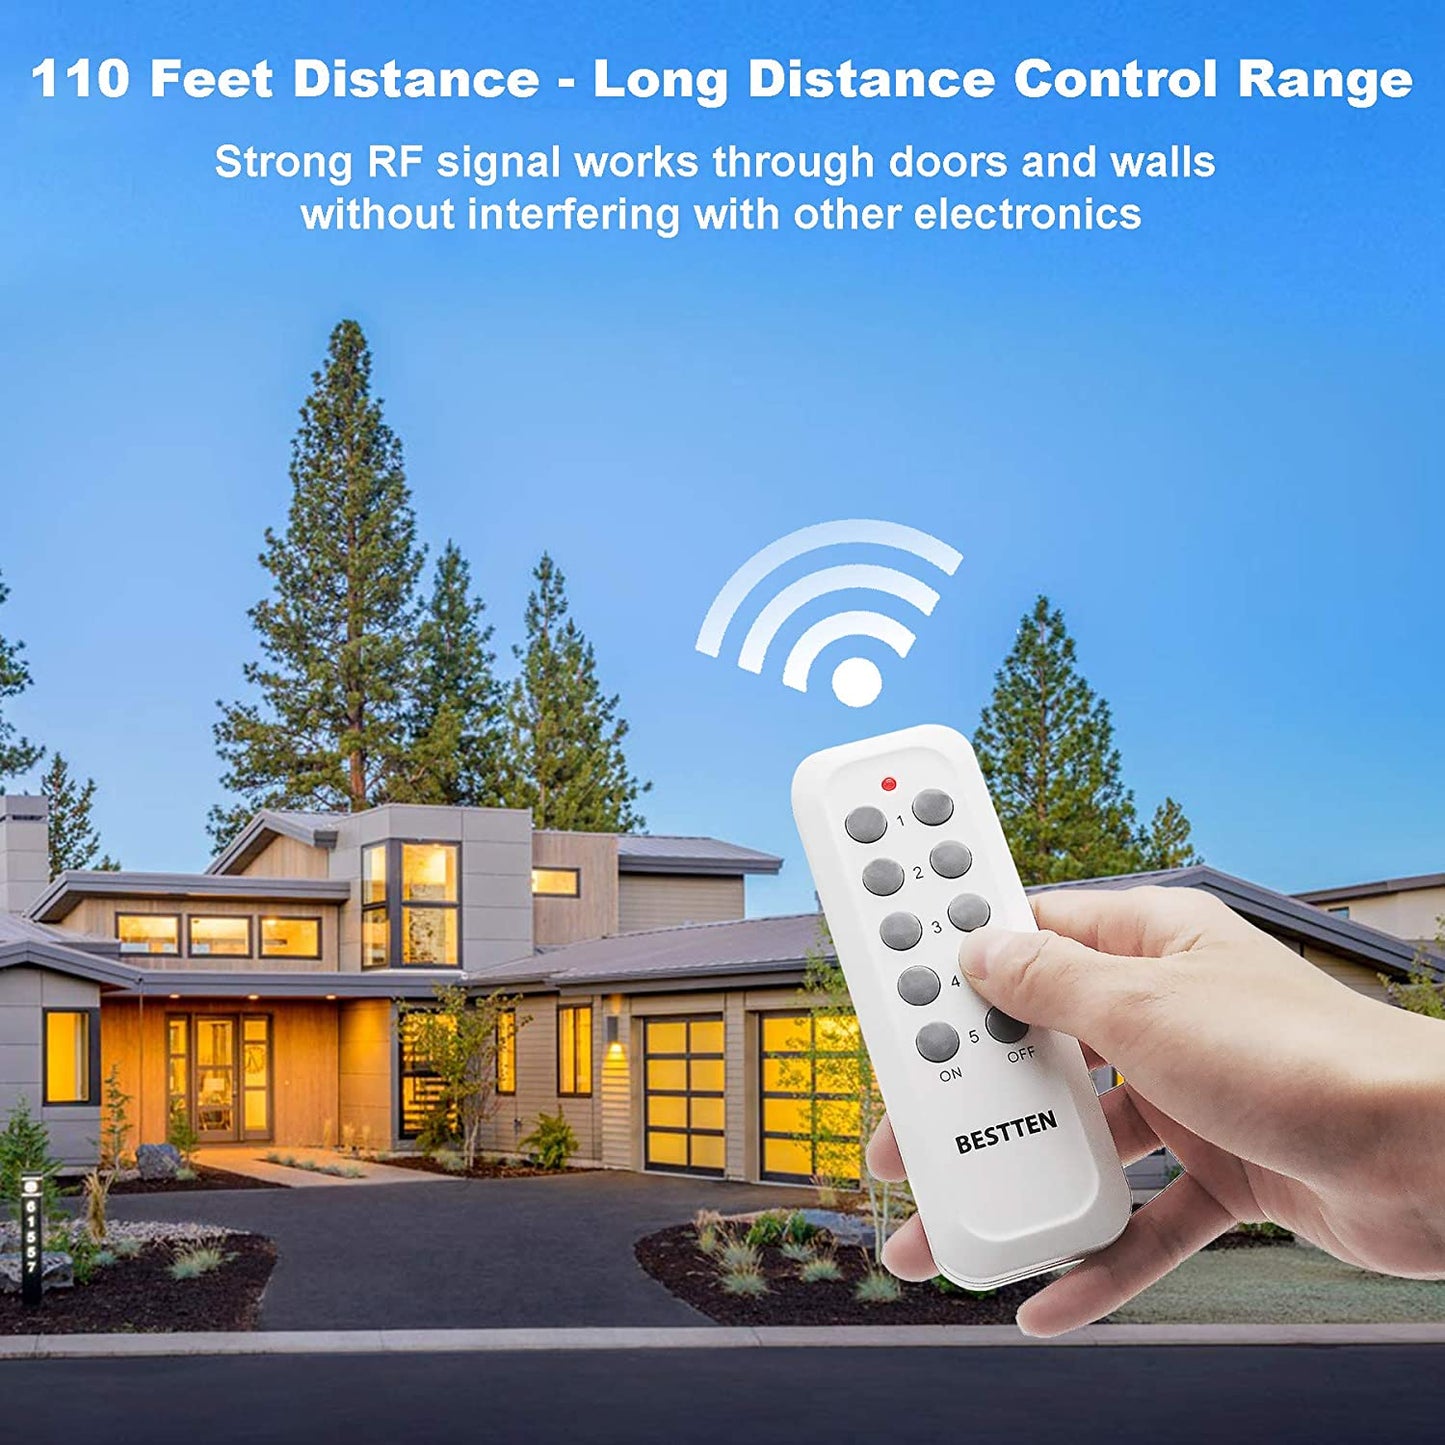 BESTTEN Wireless Remote Control Outlet Combo Kit (5 Wall Outlets + 2 Remotes), Always-ON & 1 RF Control Sockets (White)